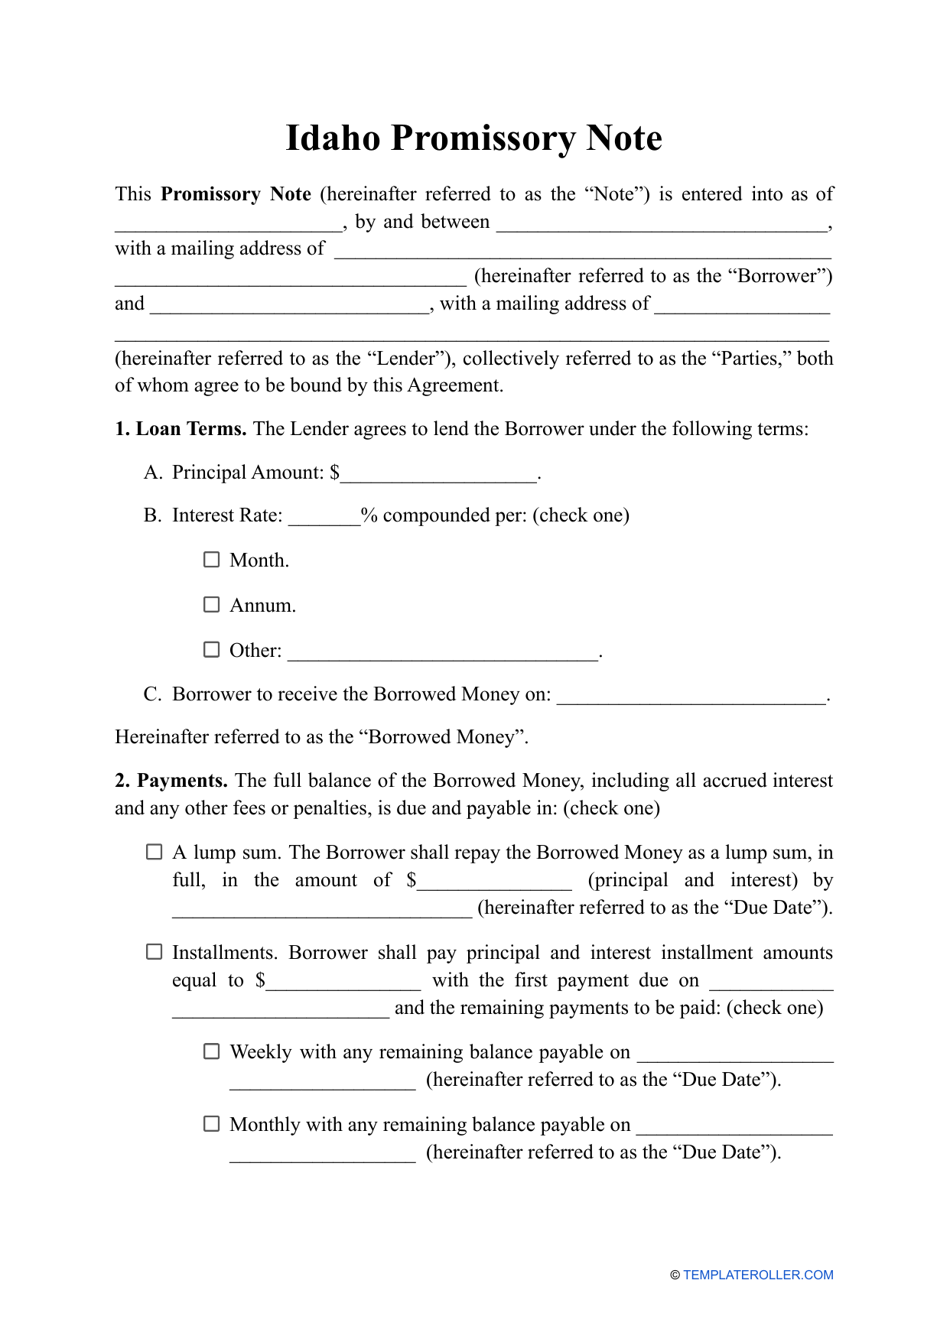 Idaho Promissory Note Template Fill Out Sign Online and Download PDF